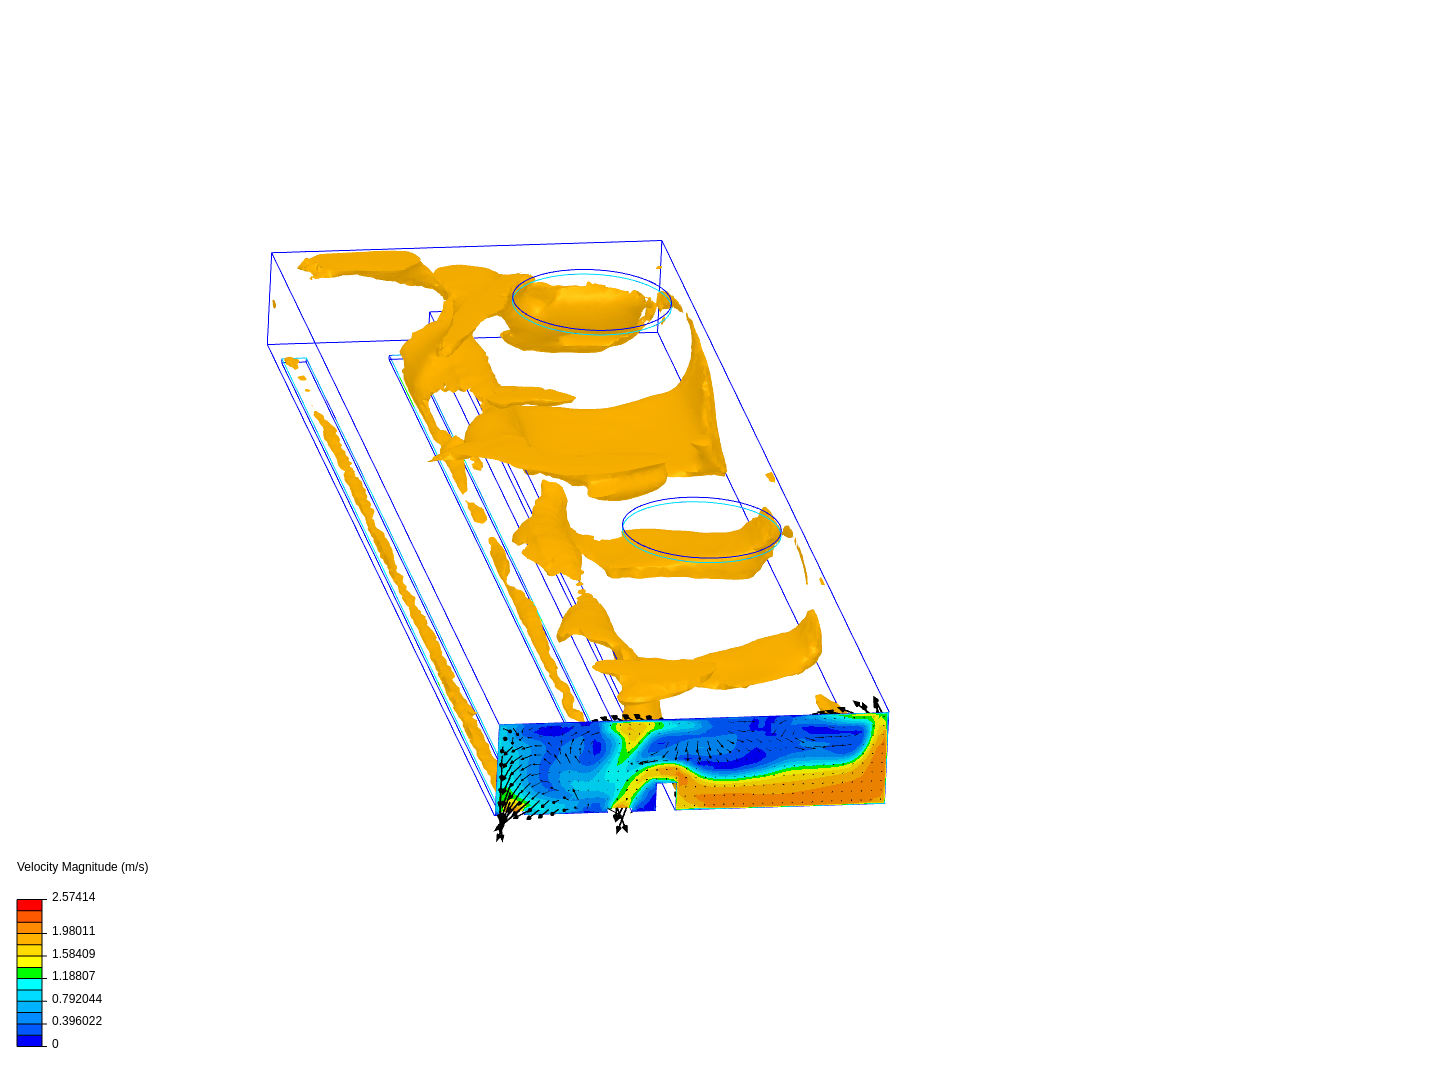 CFD calculation image